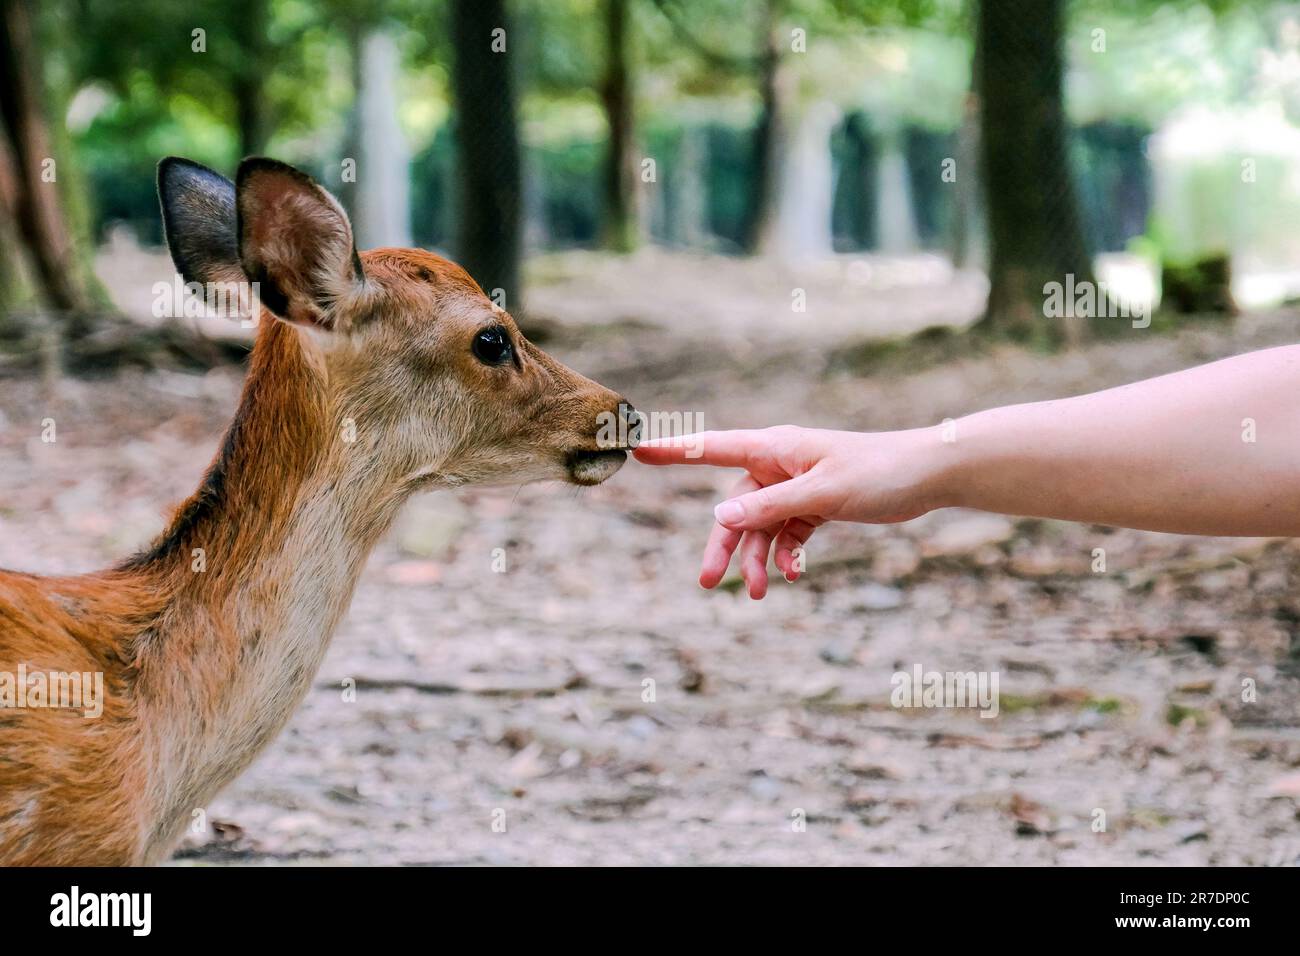 A curious sacred deer at Nara Park, Japan, approaches a woman who reaches out and touches it. Stock Photo